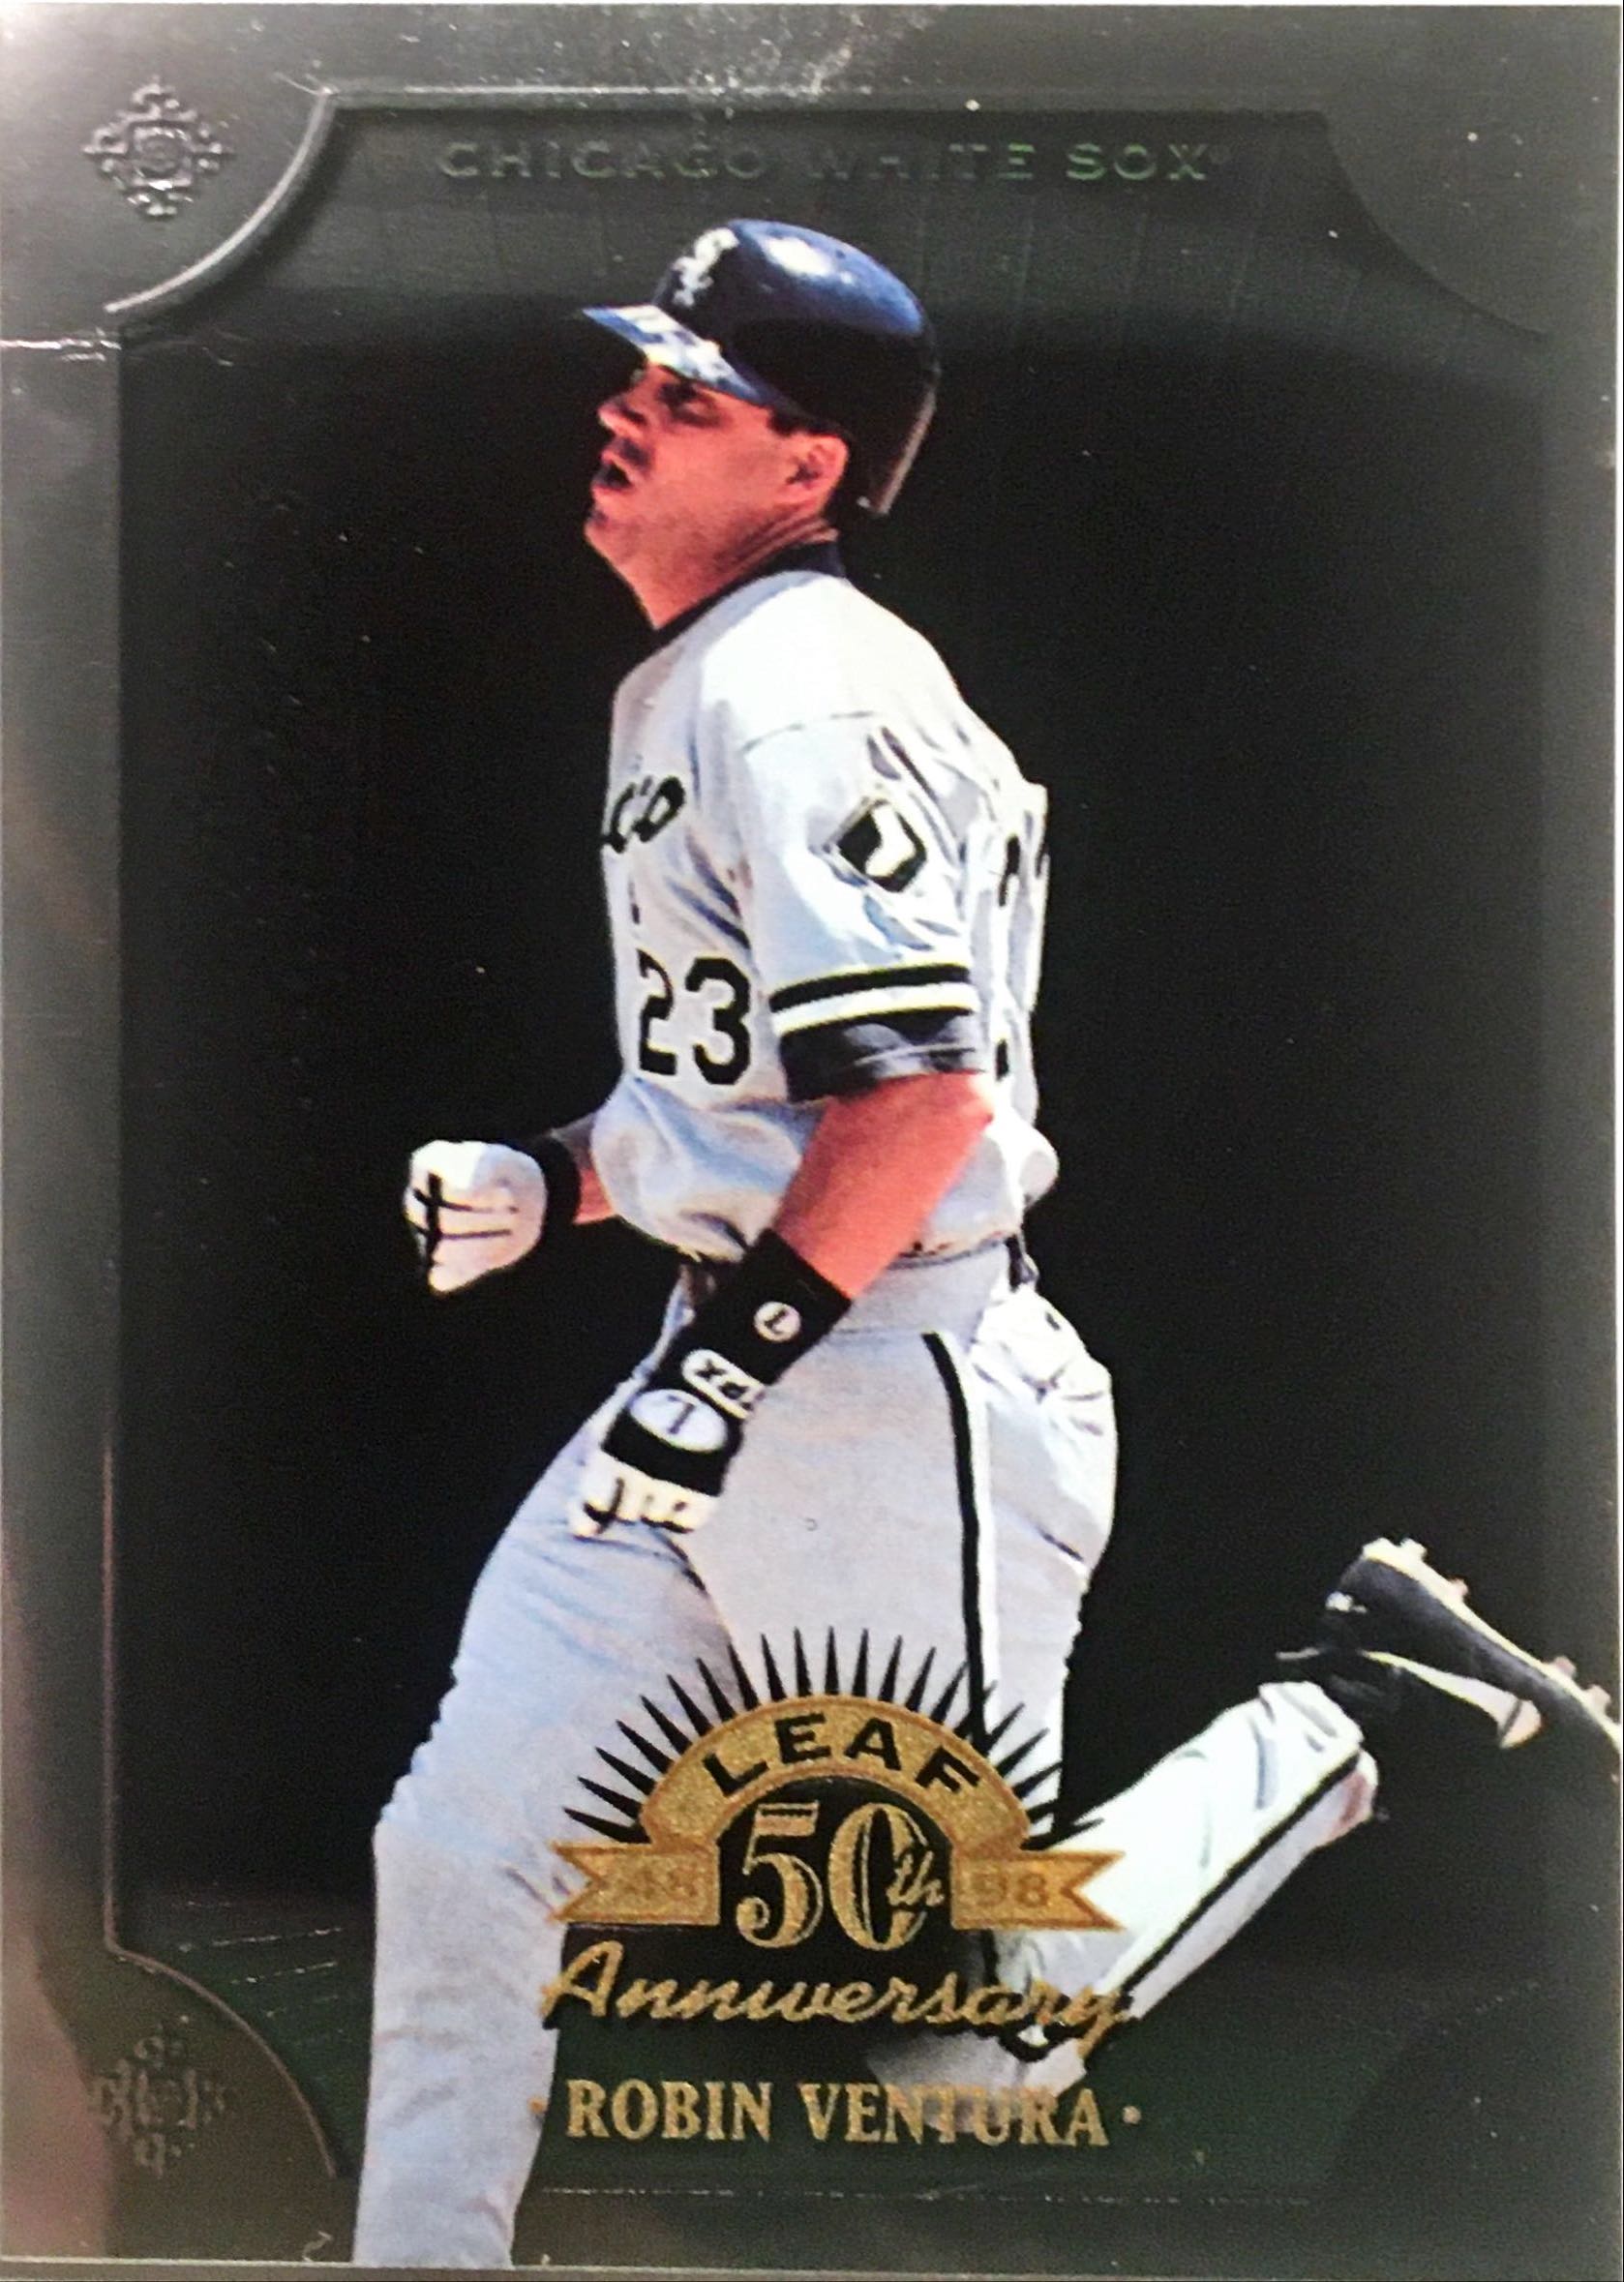 1998 Donruss Collections Leaf 267 front image